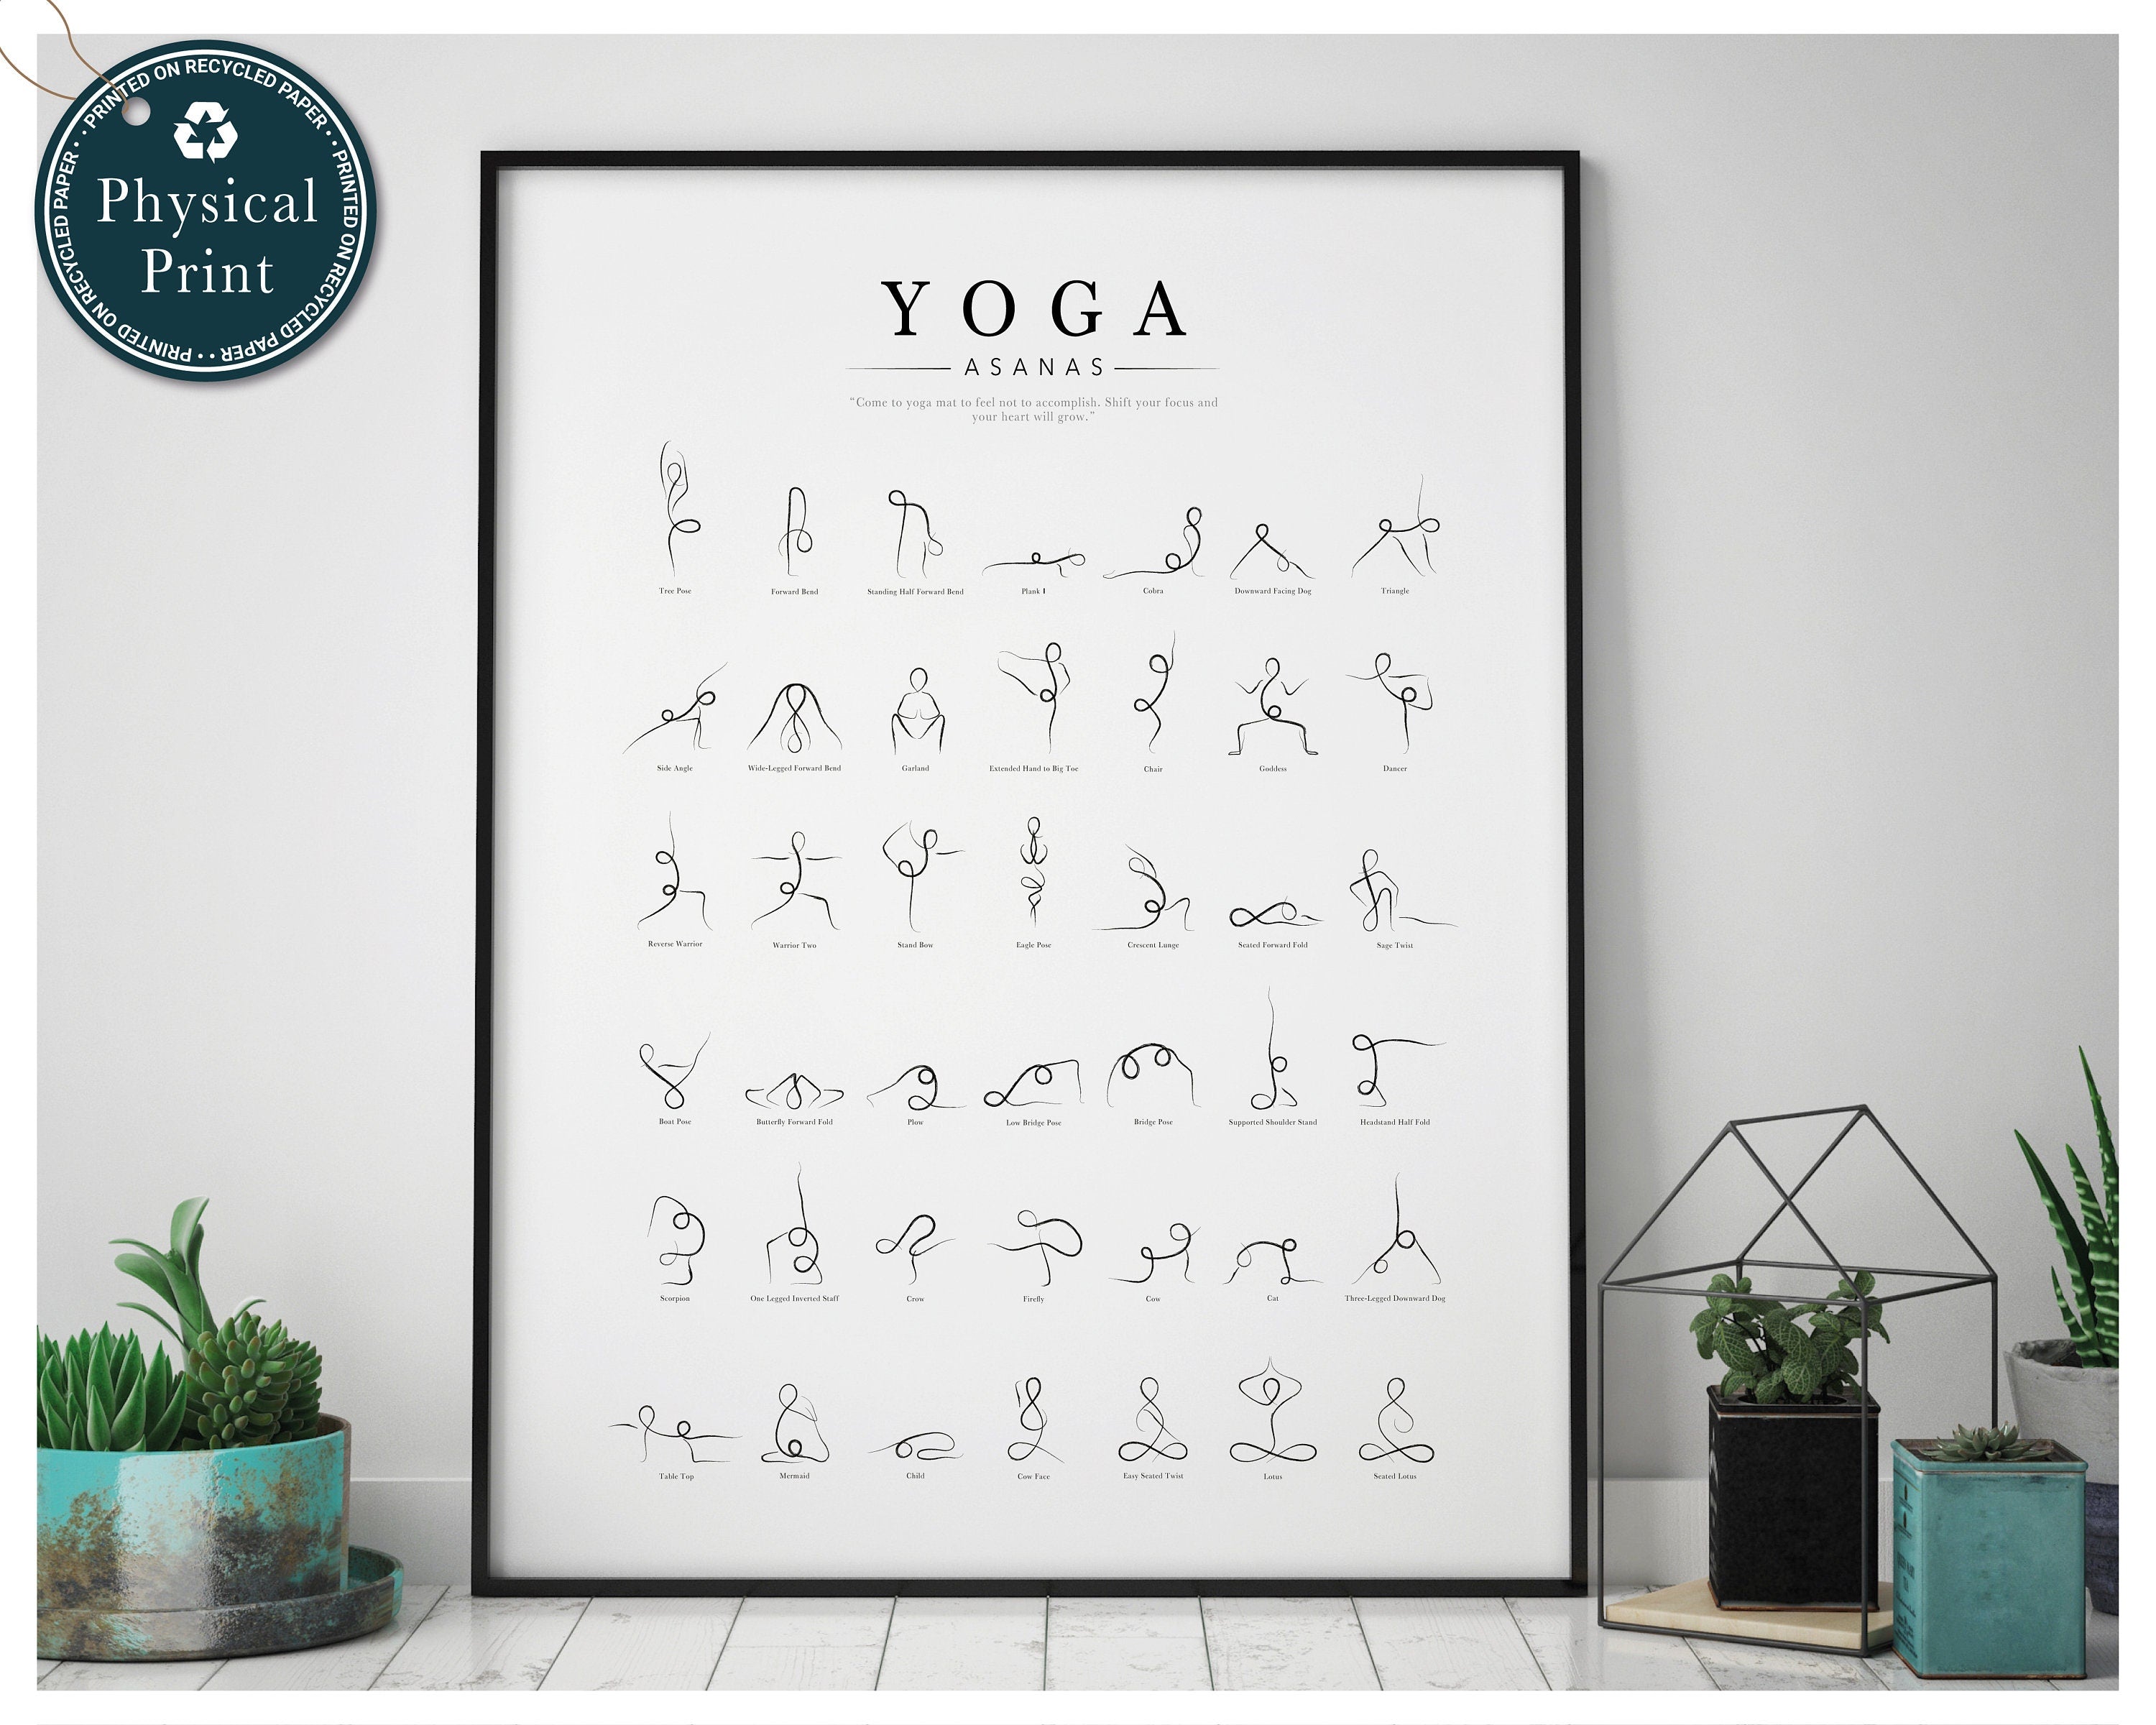 5 yoga poses or asana posture for workout in back flexibility canvas prints  for the wall • canvas prints relaxation, body, figure | myloview.com